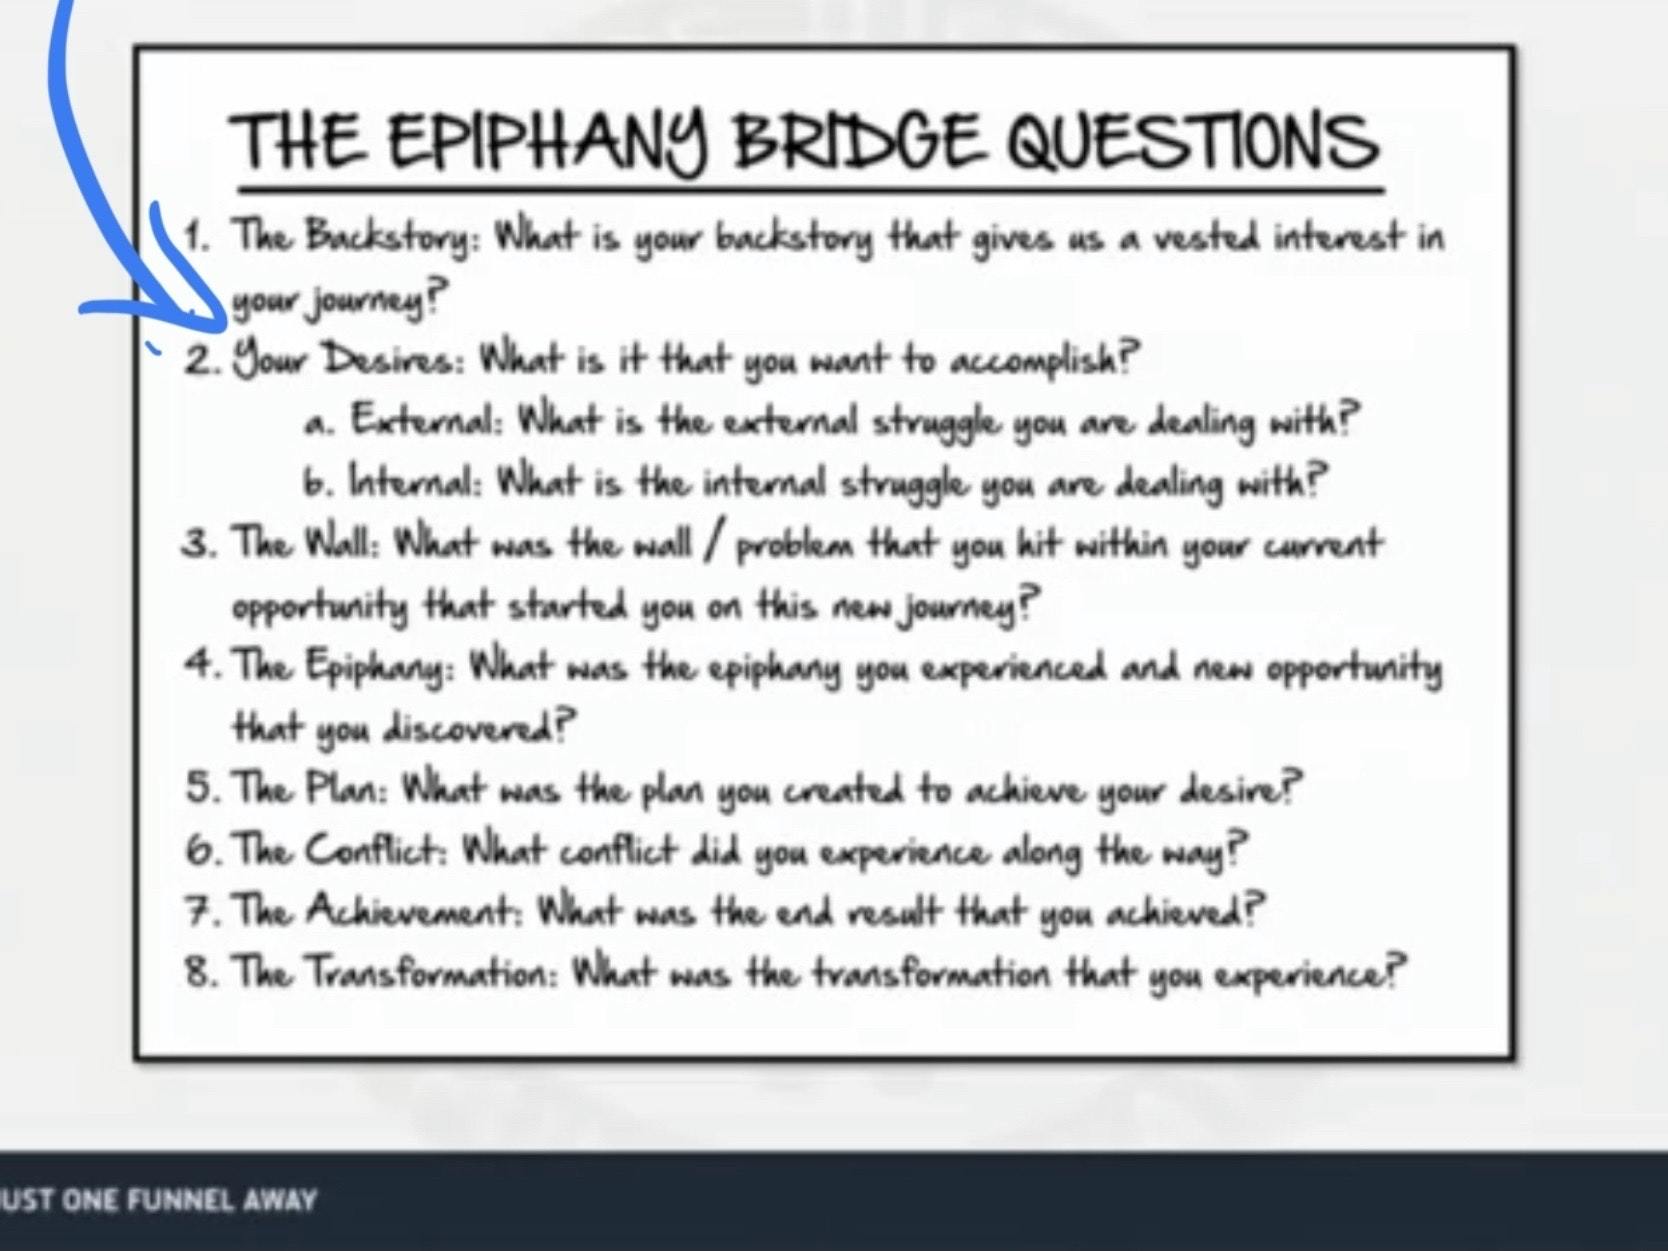 epiphany bridge script questions from expert secrets book by russell brunson and clickfunnels